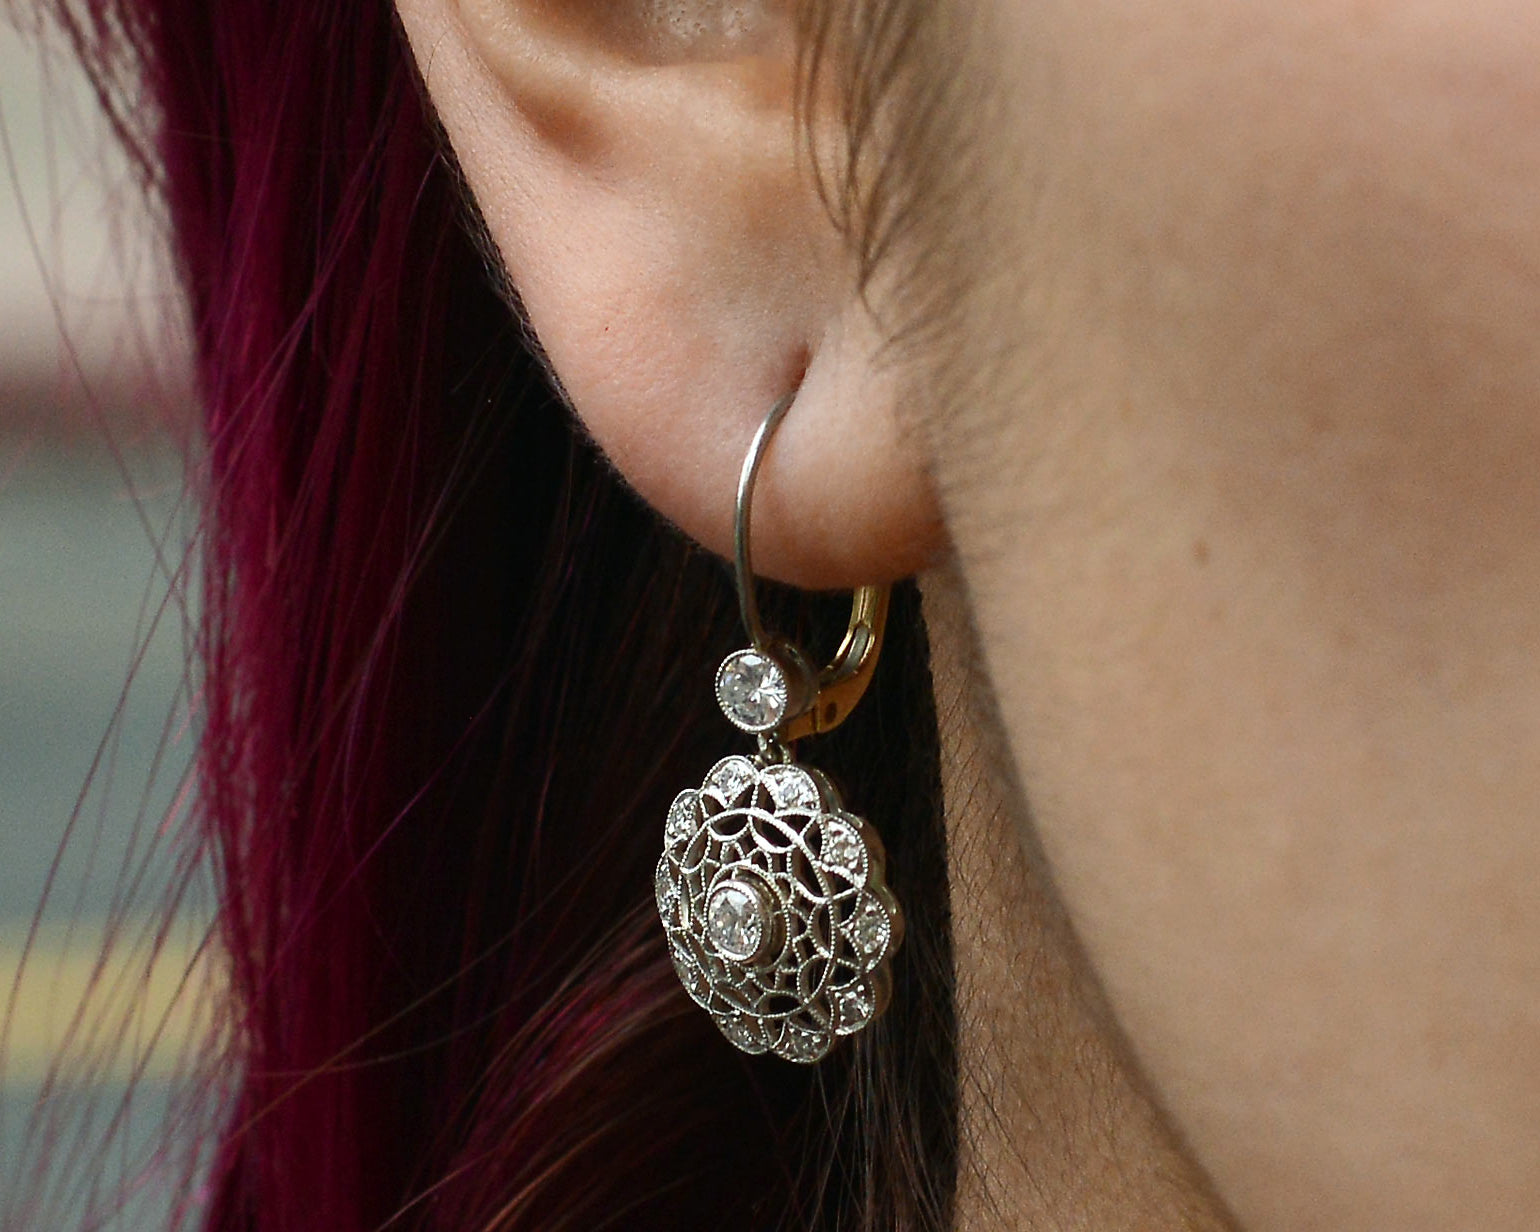 A webbed filigree design of earrings that resembles snowflakes.